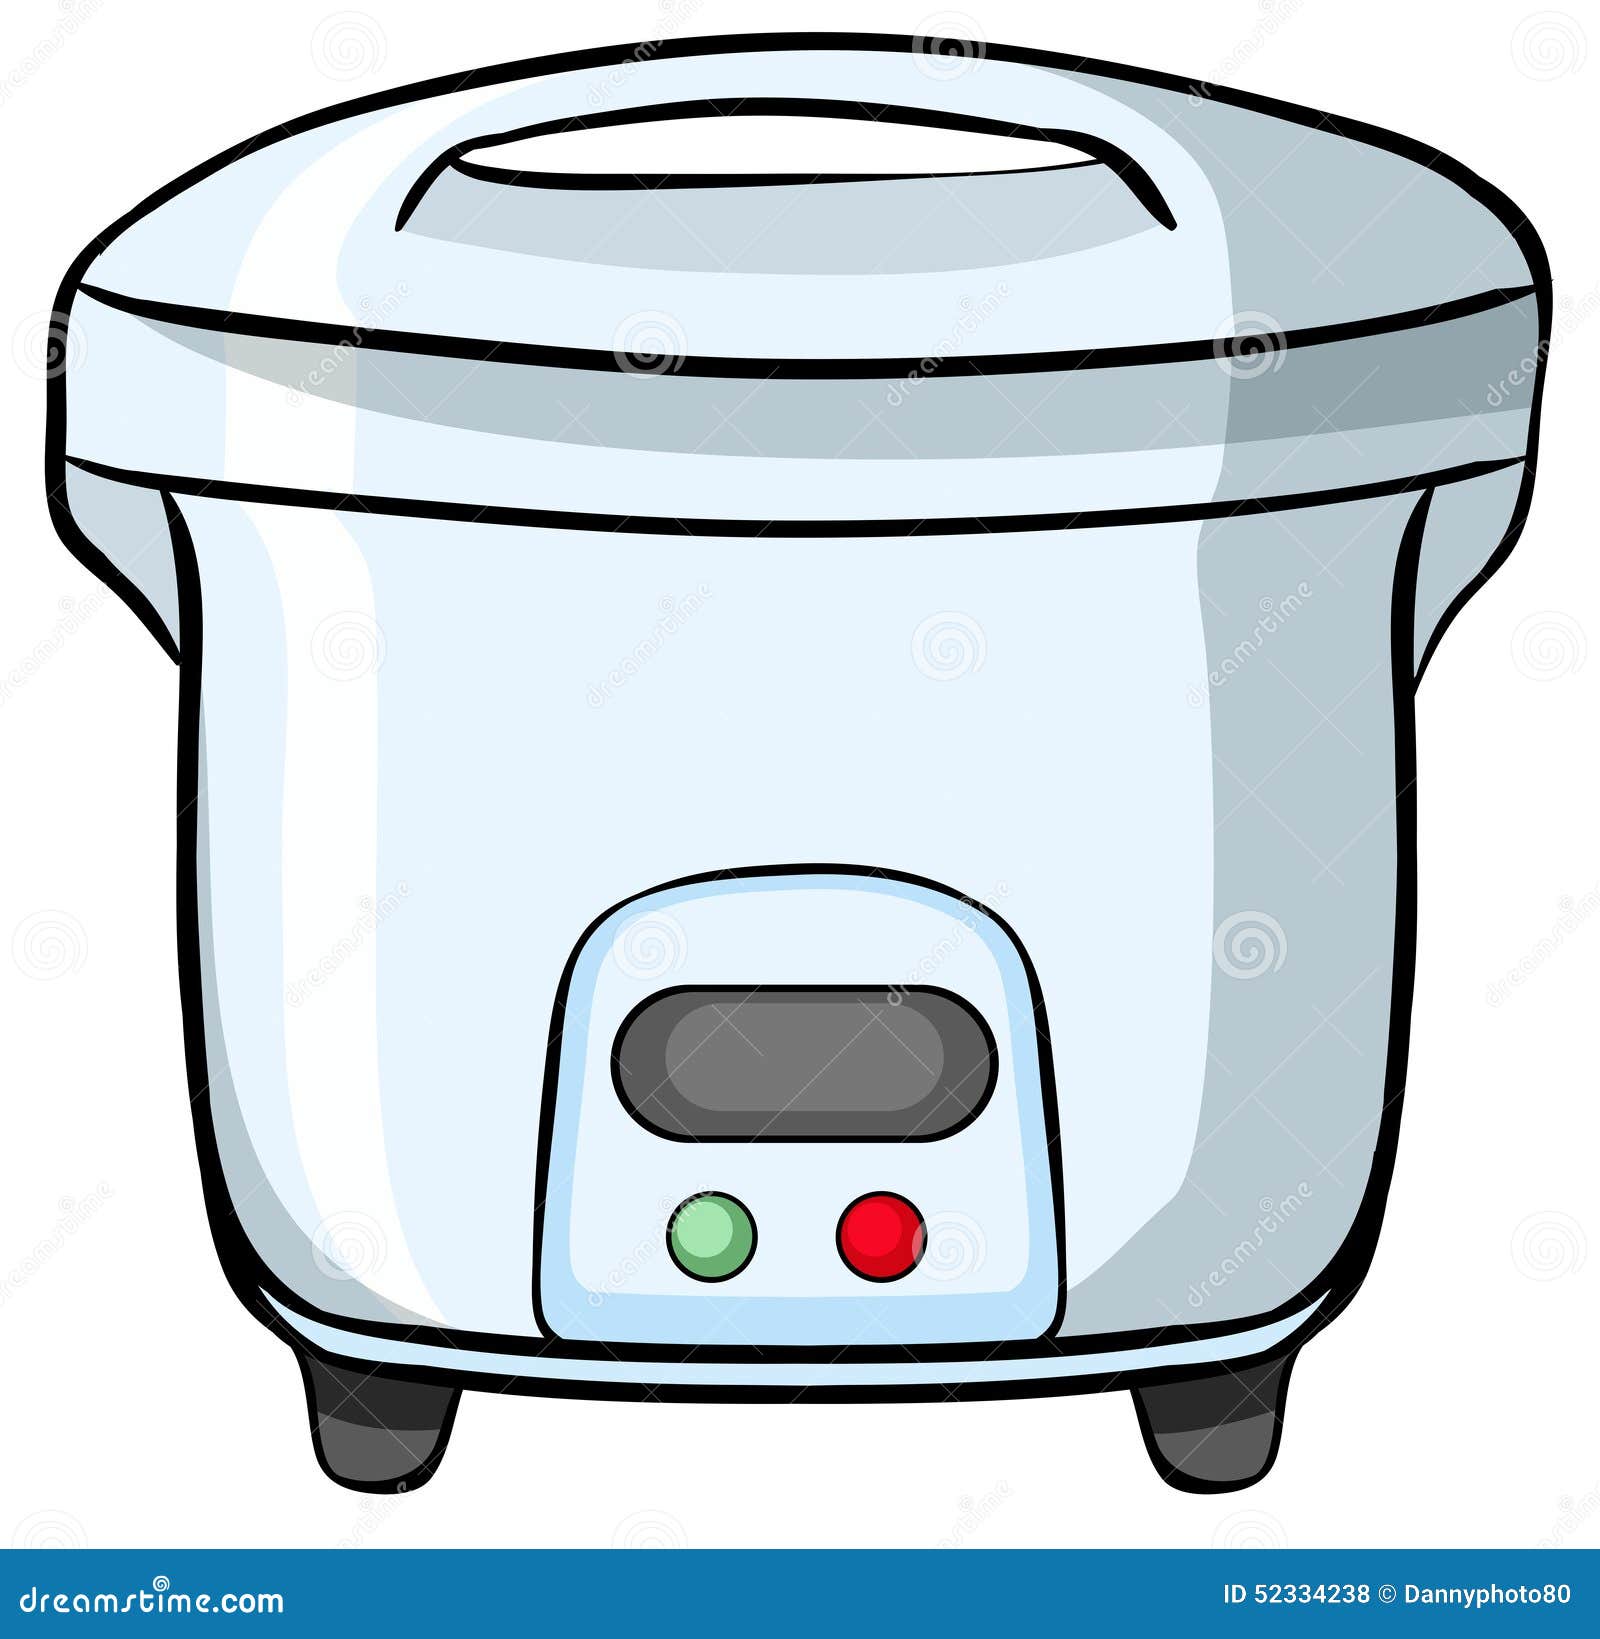 Cooker Cartoons, Illustrations & Vector Stock Images - 37001 Pictures